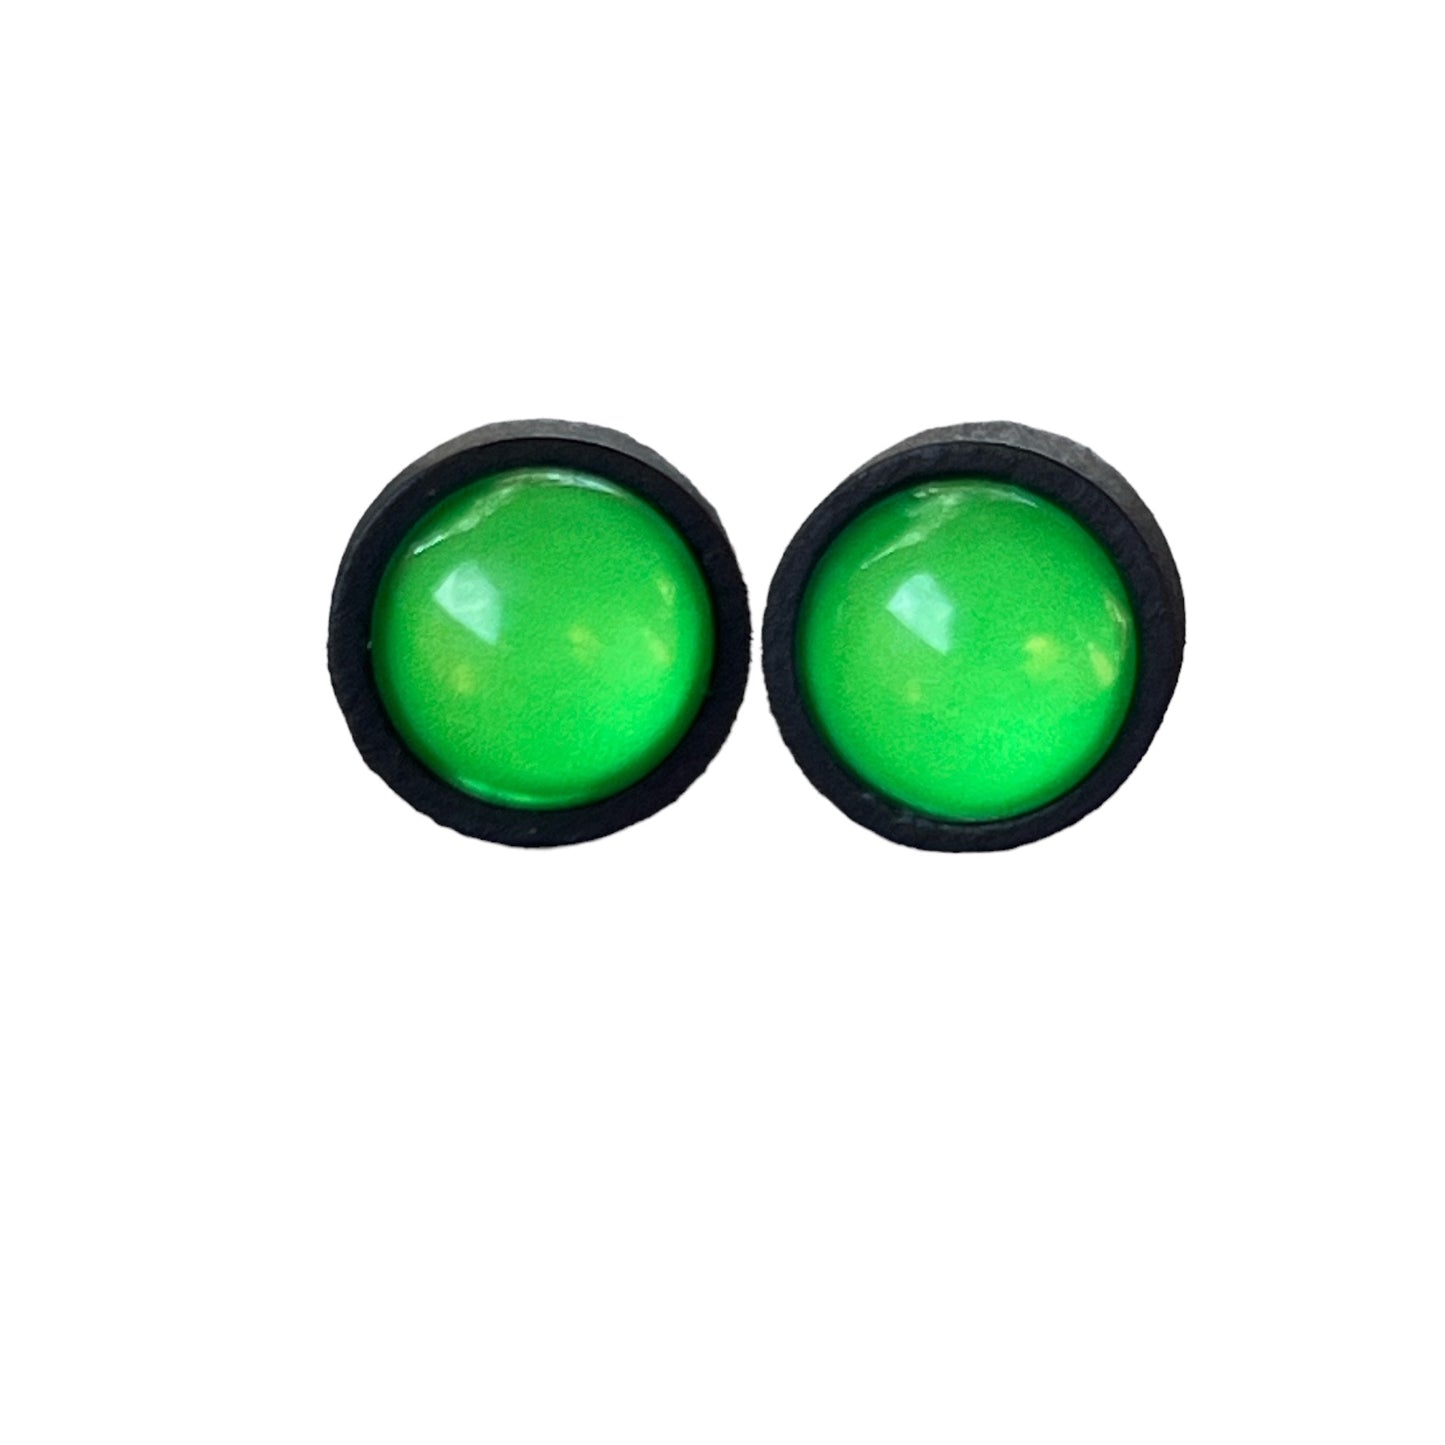 Bright Green & Black Wood Earring Studs - Vibrant and Stylish Accessories